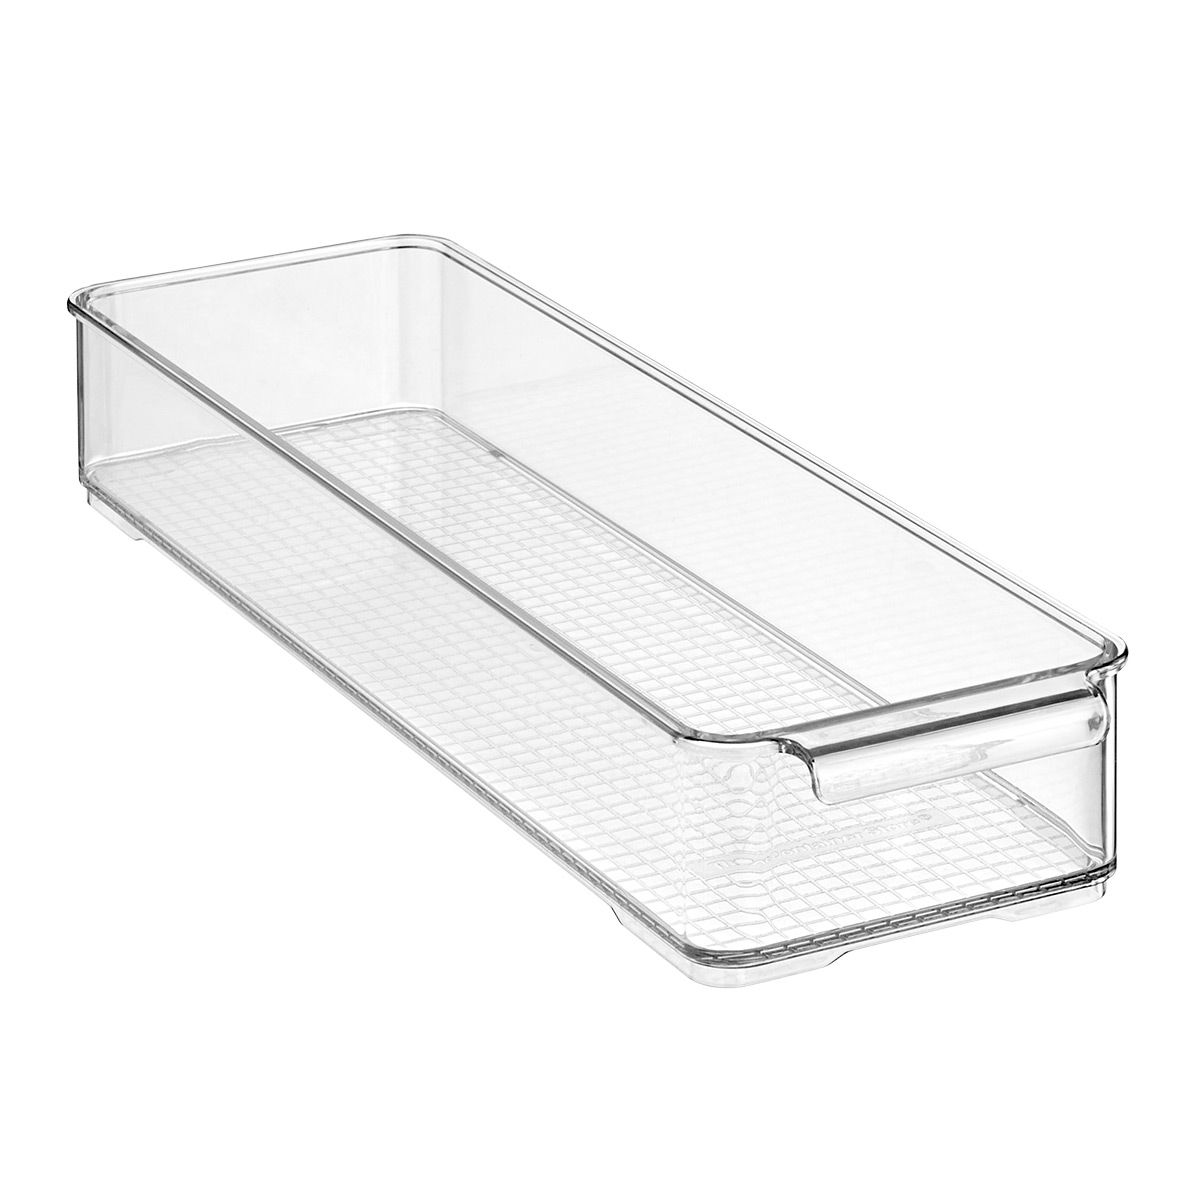 Everything Organizer Shallow Narrow Fridge Bin Clear | The Container Store